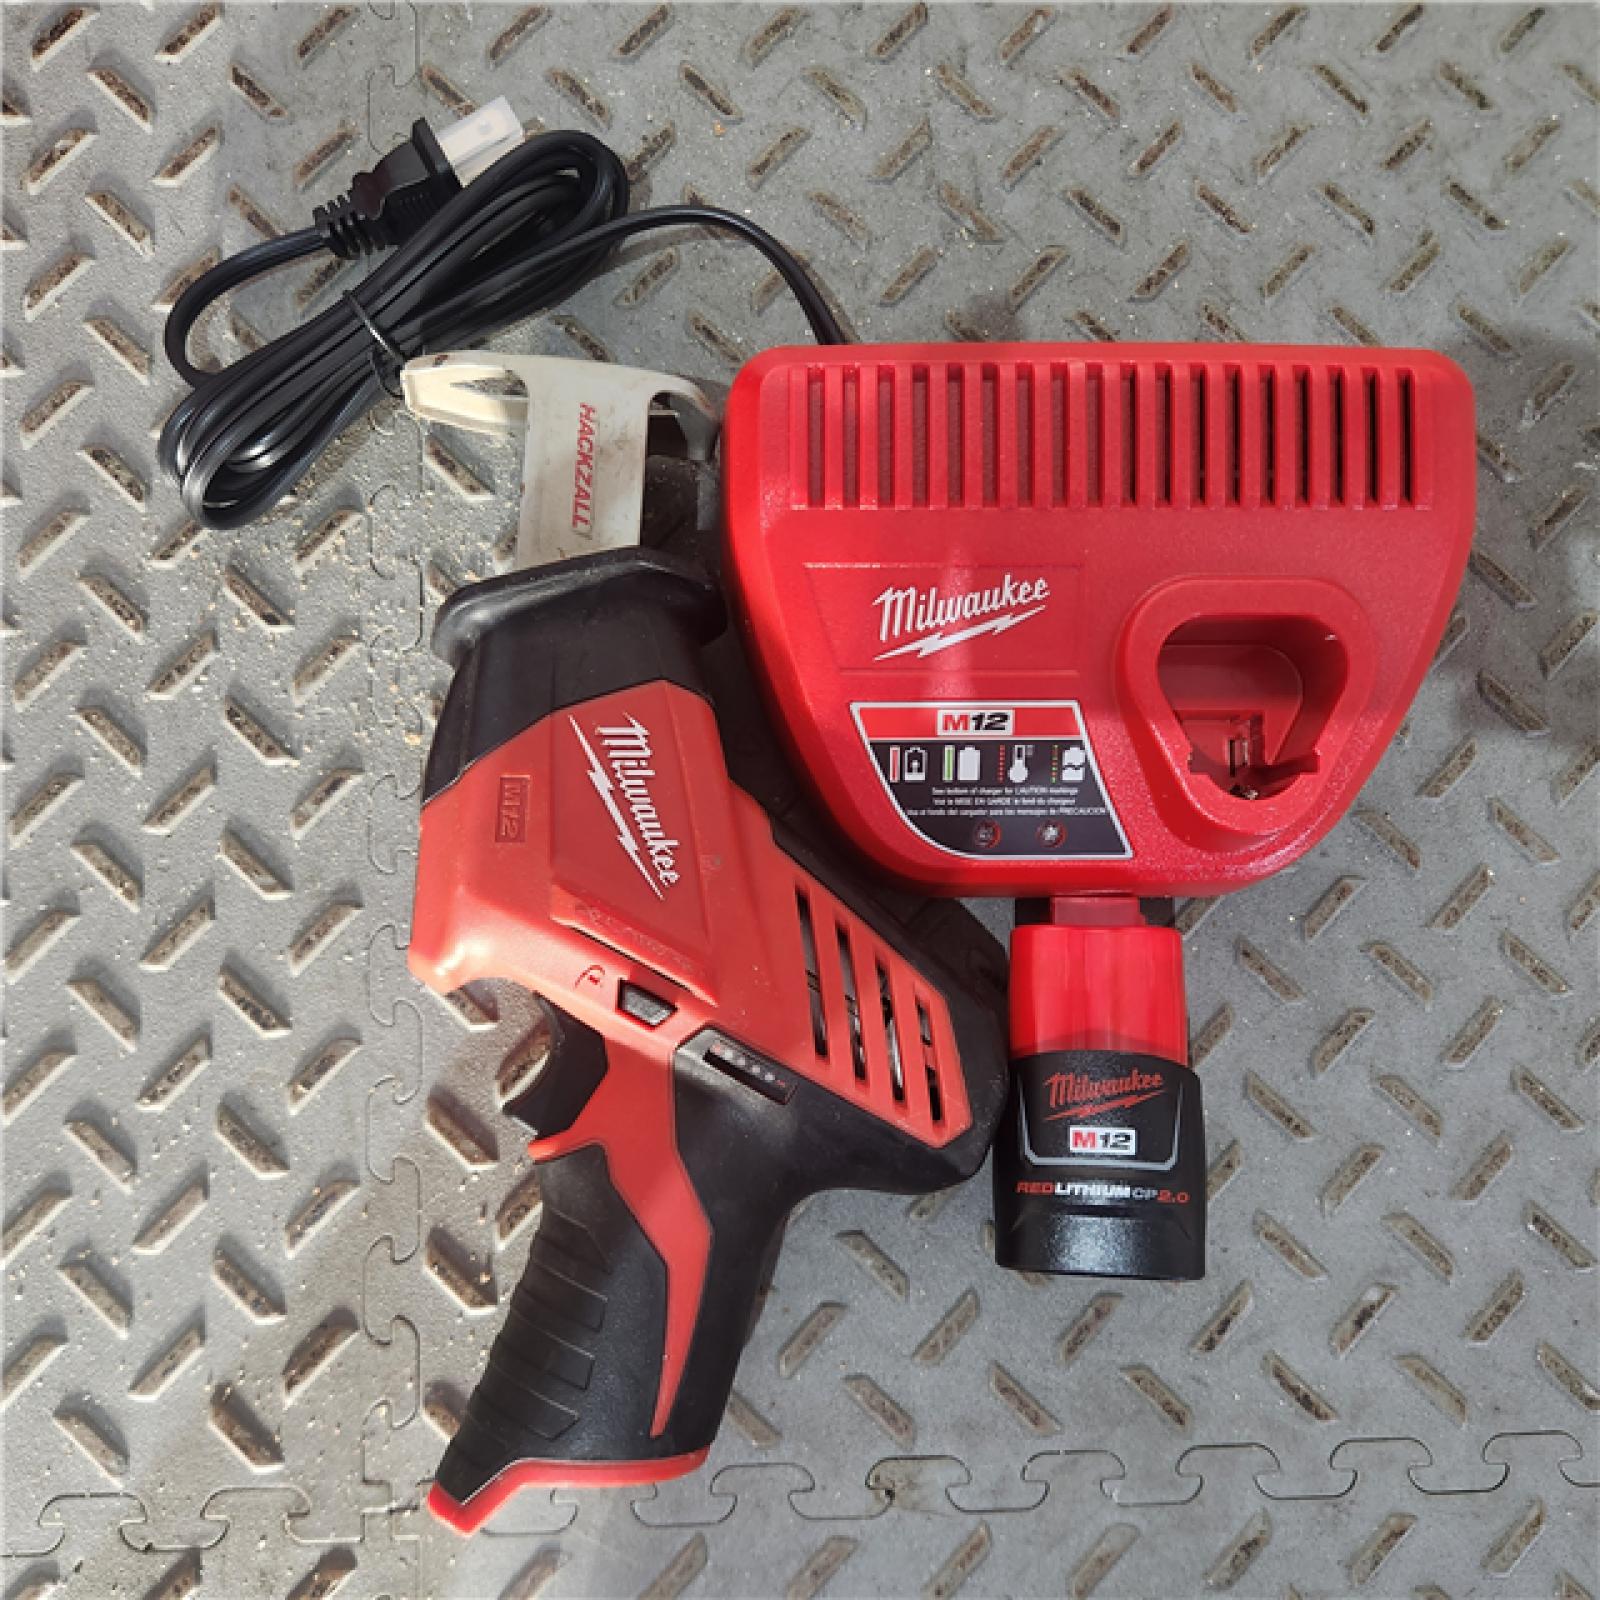 Houston Location AS IS - Milwaukee 2420-21 M12 Hackzall Cordless Reciprocating Saw Kit In Good Condition